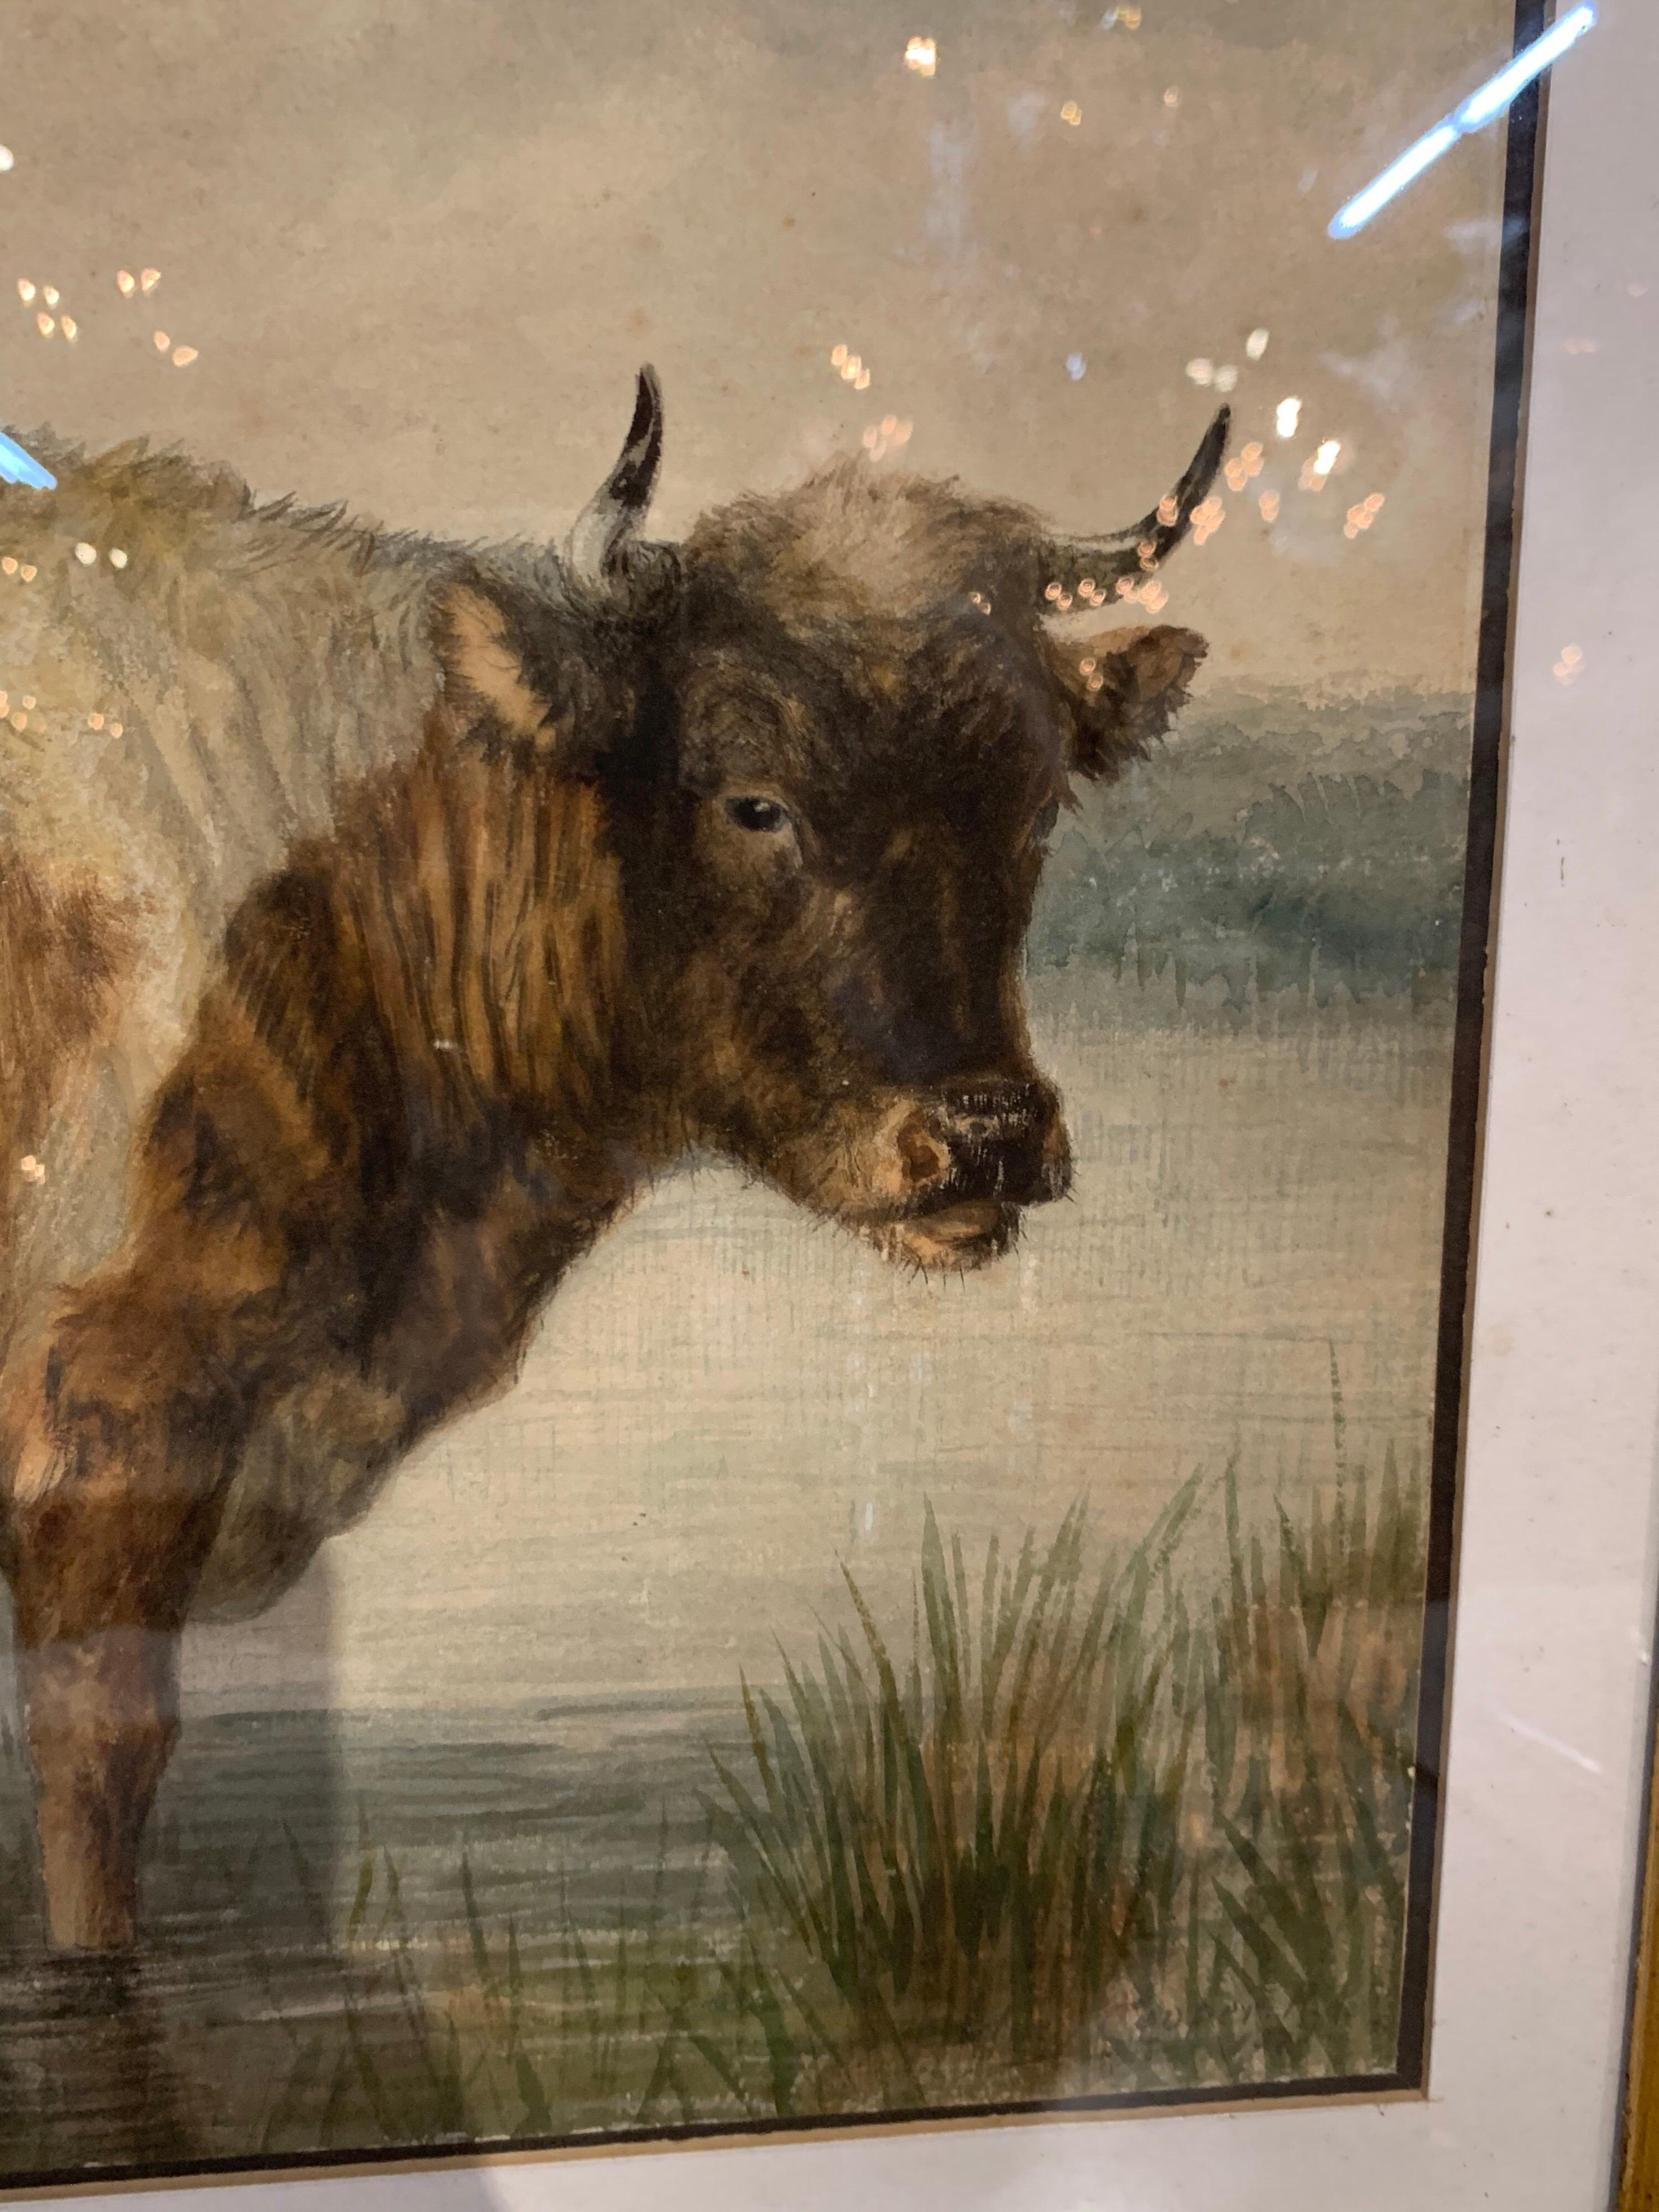 Lovely 19th century English watercolor by Thomas S. Cooper in beautiful gold gilt frame. The scene depicts 2 cows in a rural setting. Incredible detail in this painting. A very fine piece of art!